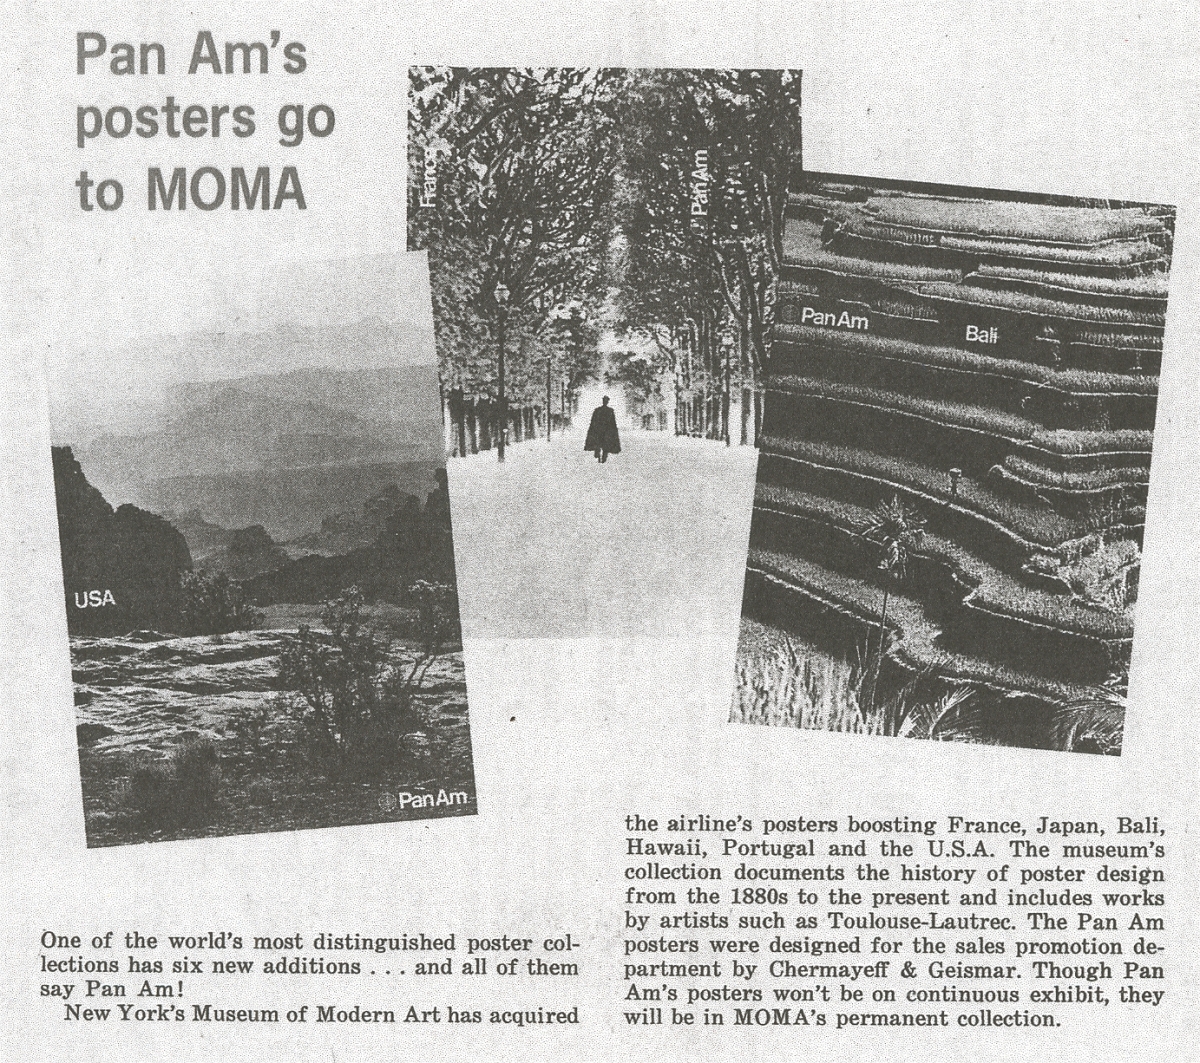 Visuals: Printed Matter from ’70s Pan Am